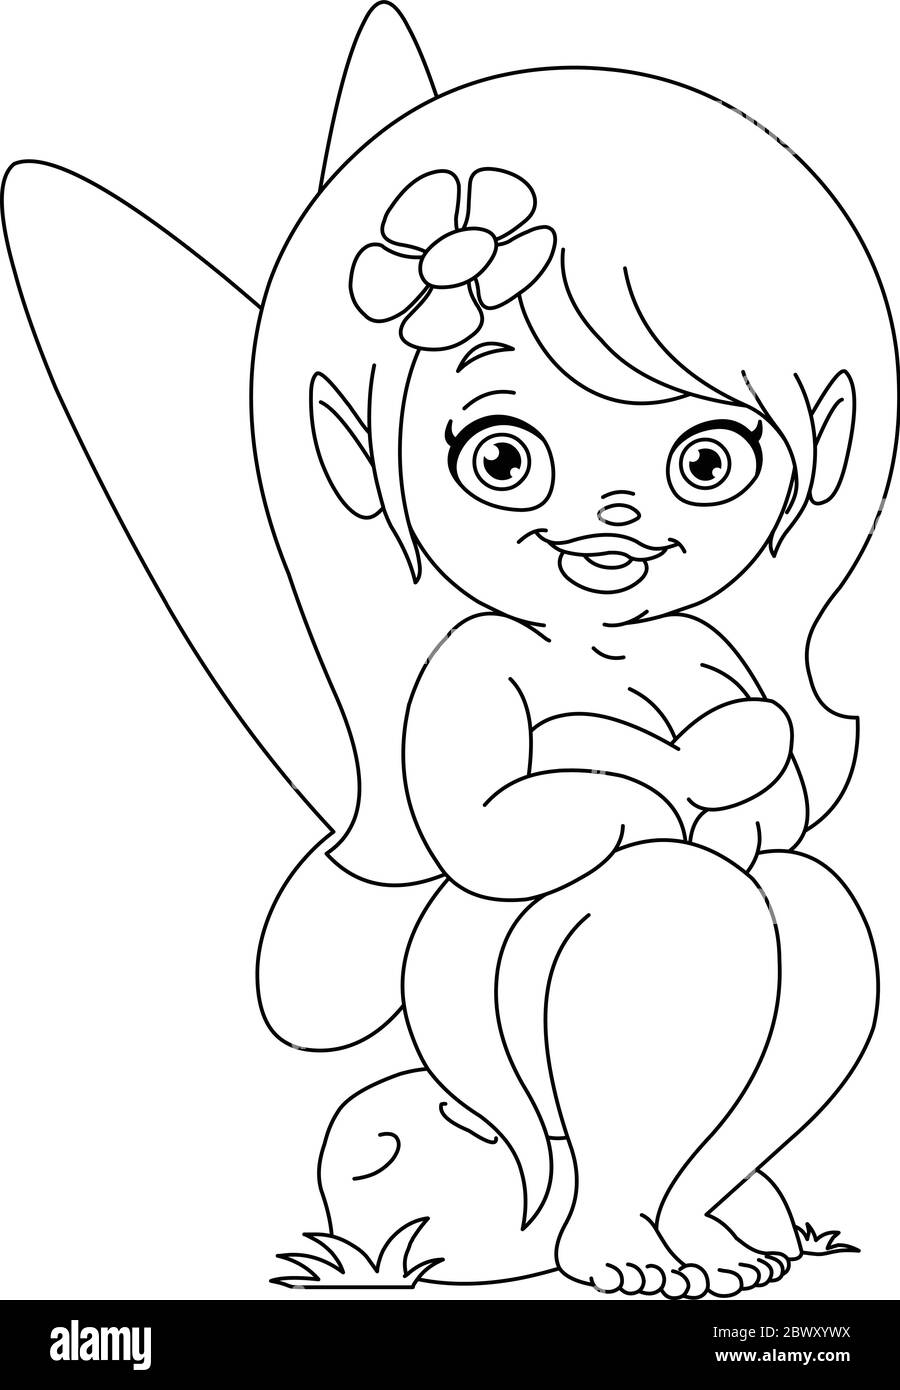 Outlined cute fairy sitting on a rock. Vector line art illustration coloring page. Stock Vector